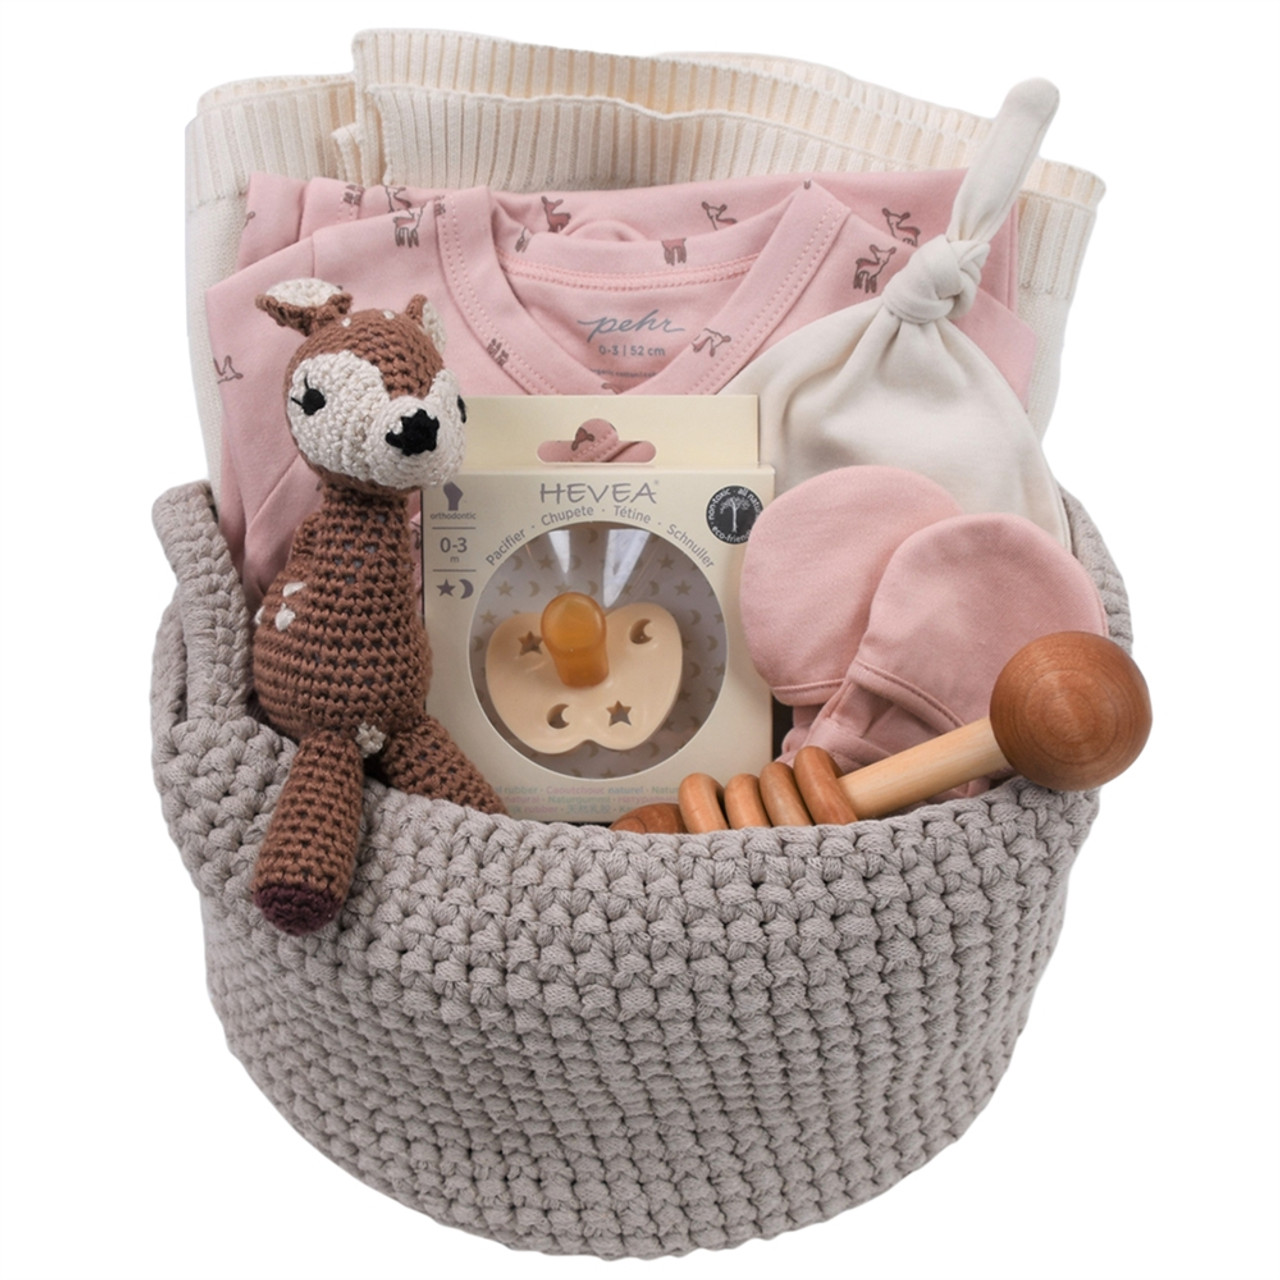 New Baby Girl Gift Basket - Fawned Over